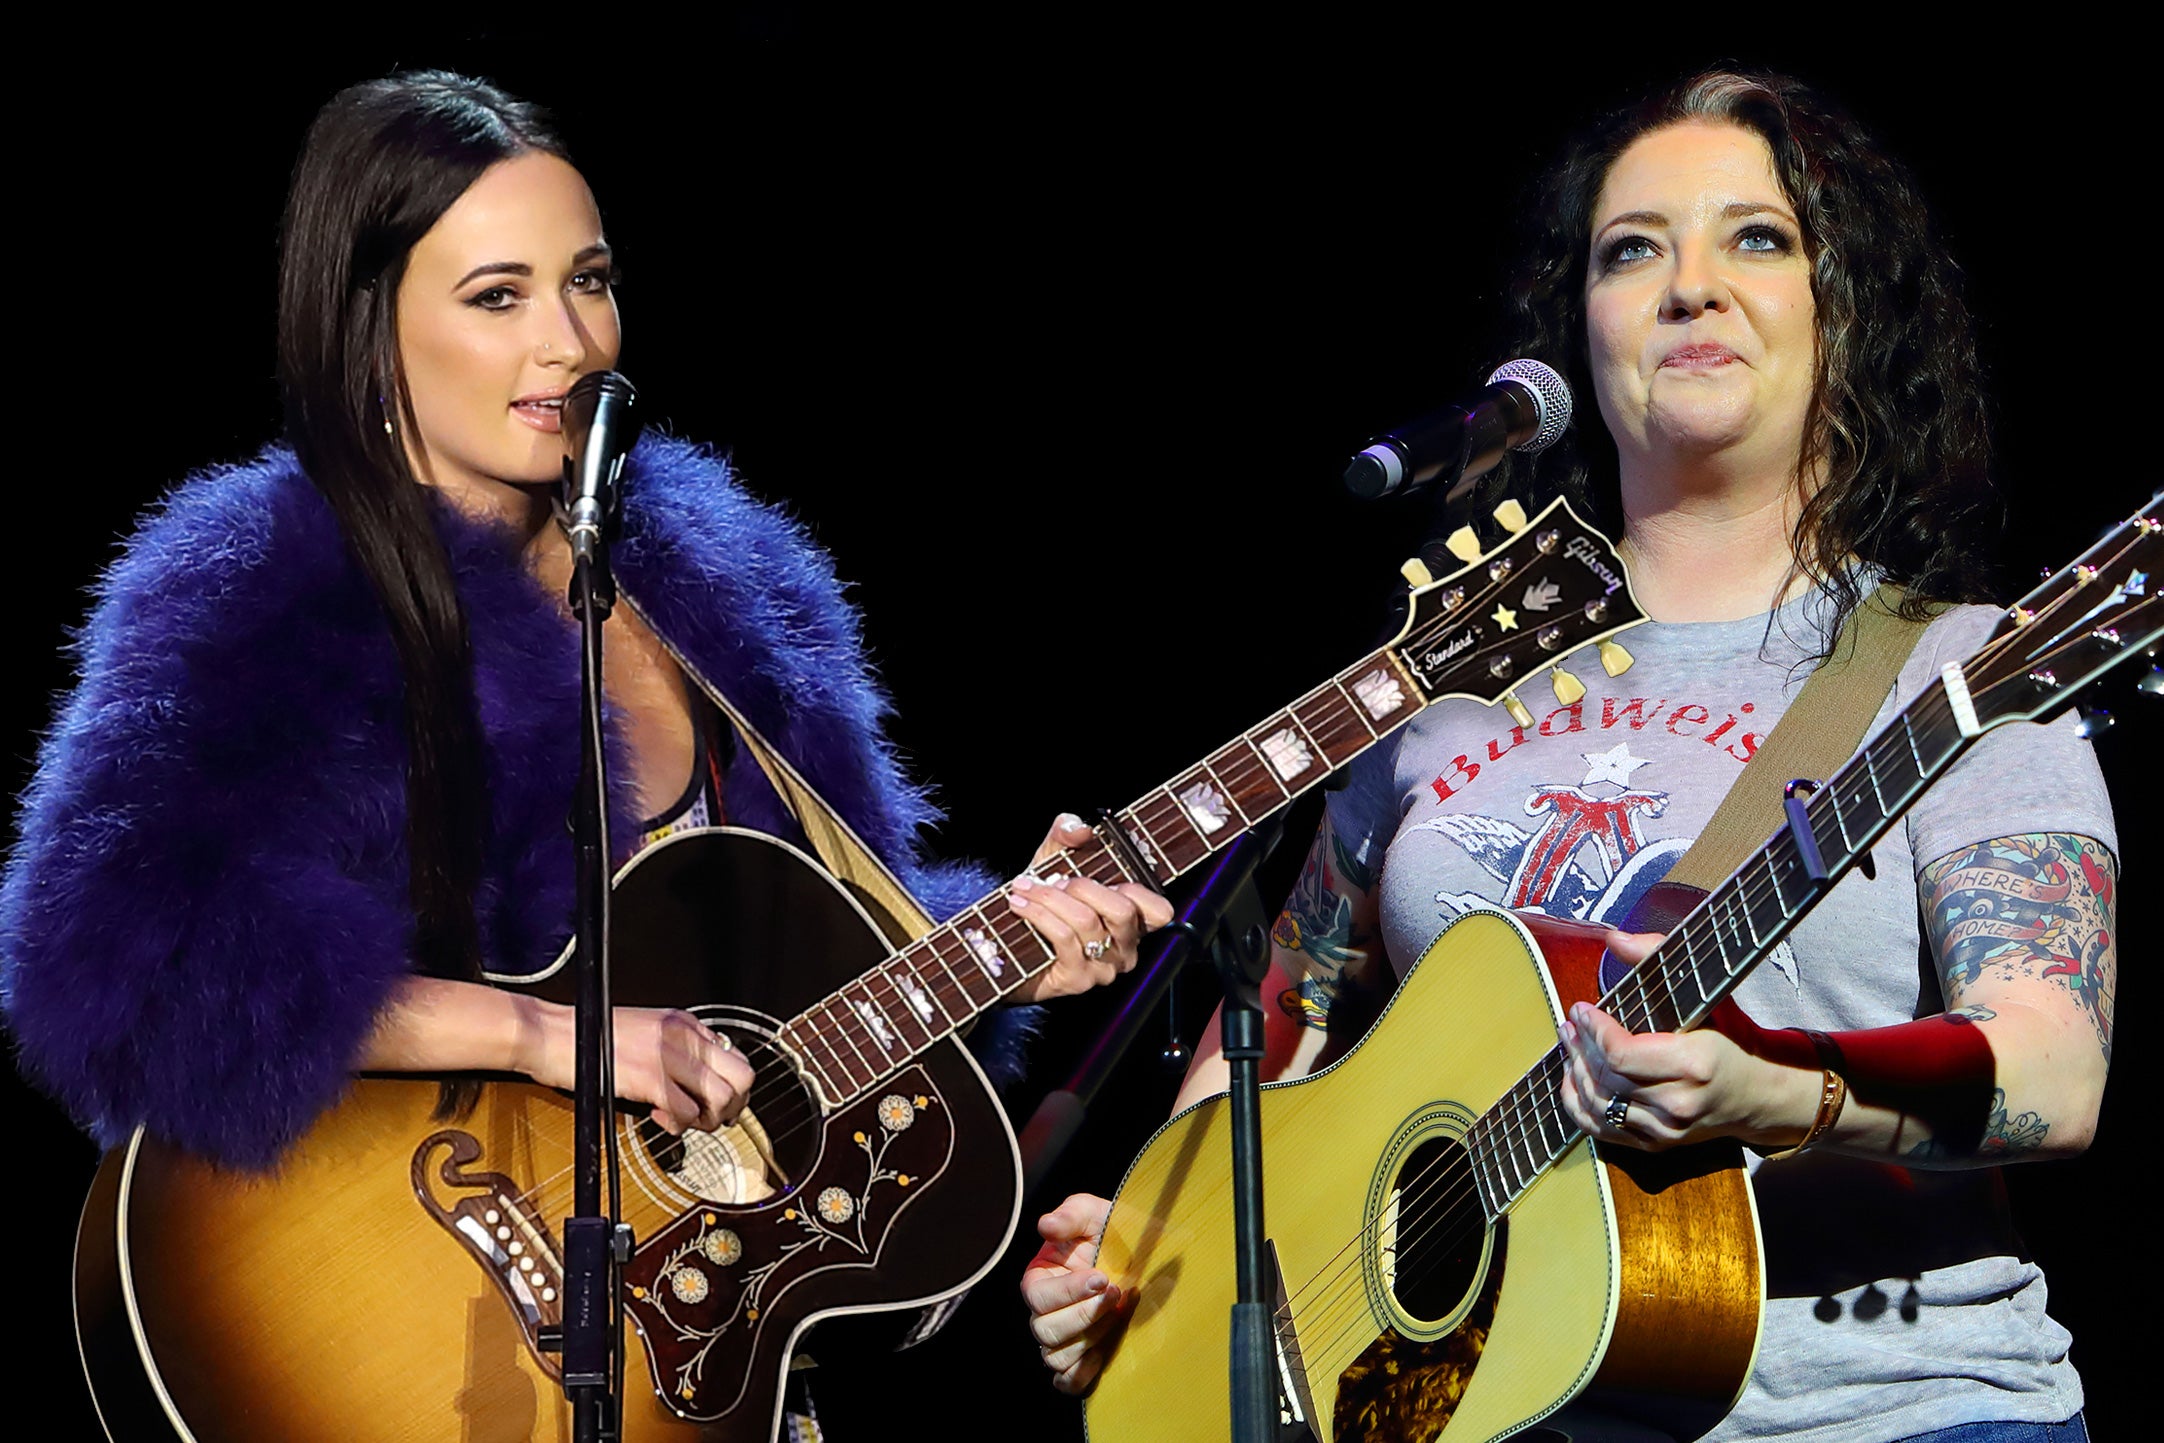 Kacey Musgraves and Ashley McBryde.